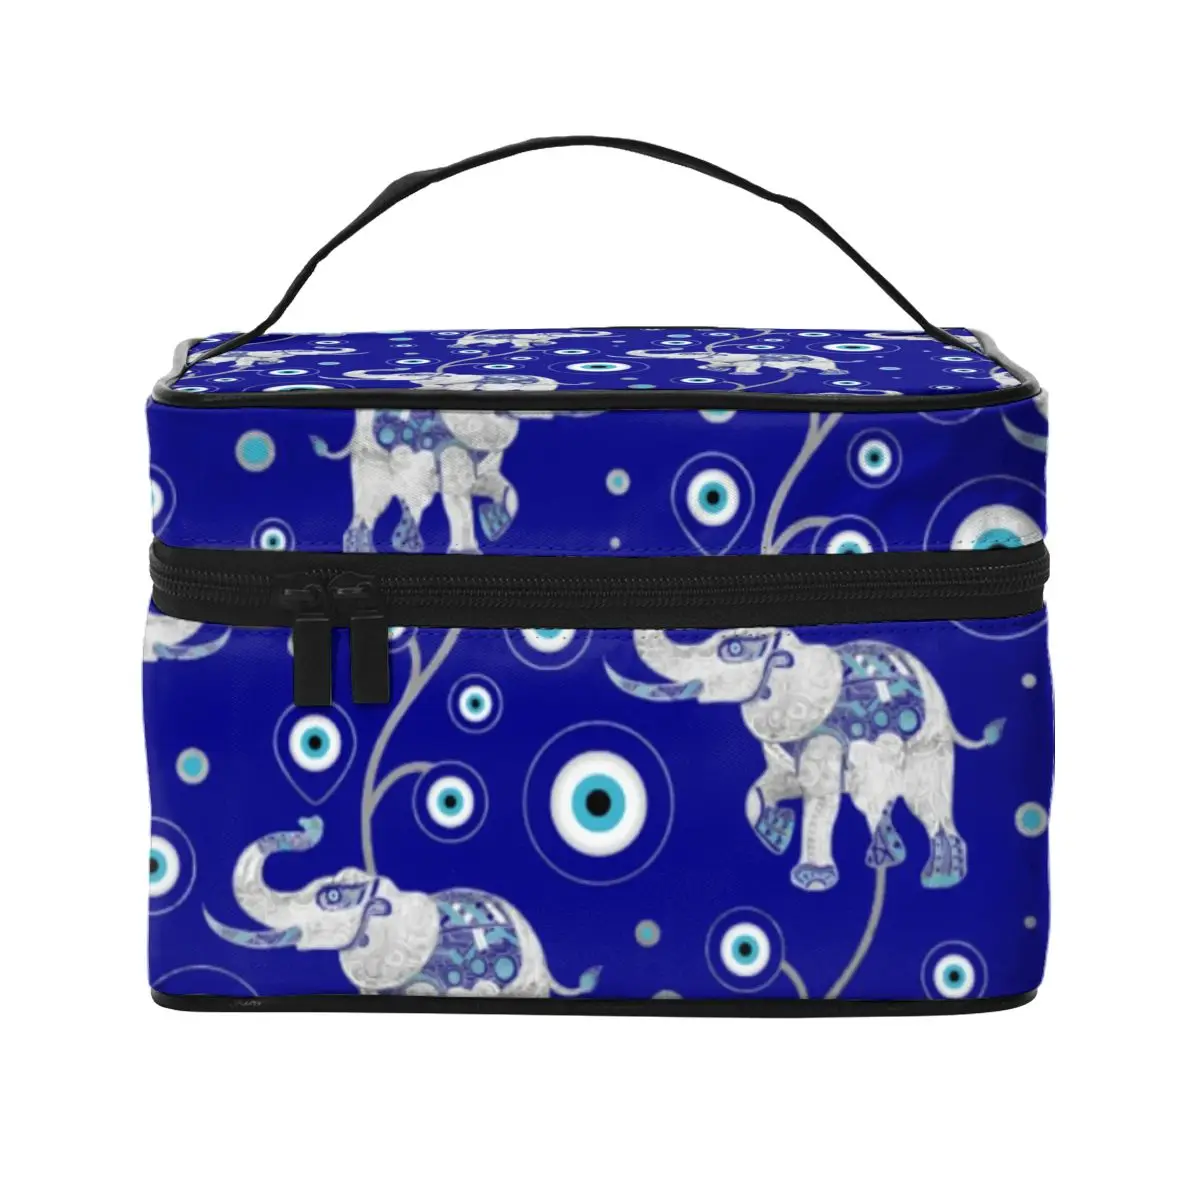 

Evil Eye Elephant Cosmetic Bags Good Luck Amulet Women Storage Organizers with Handle Organization Home Makeup Pouch